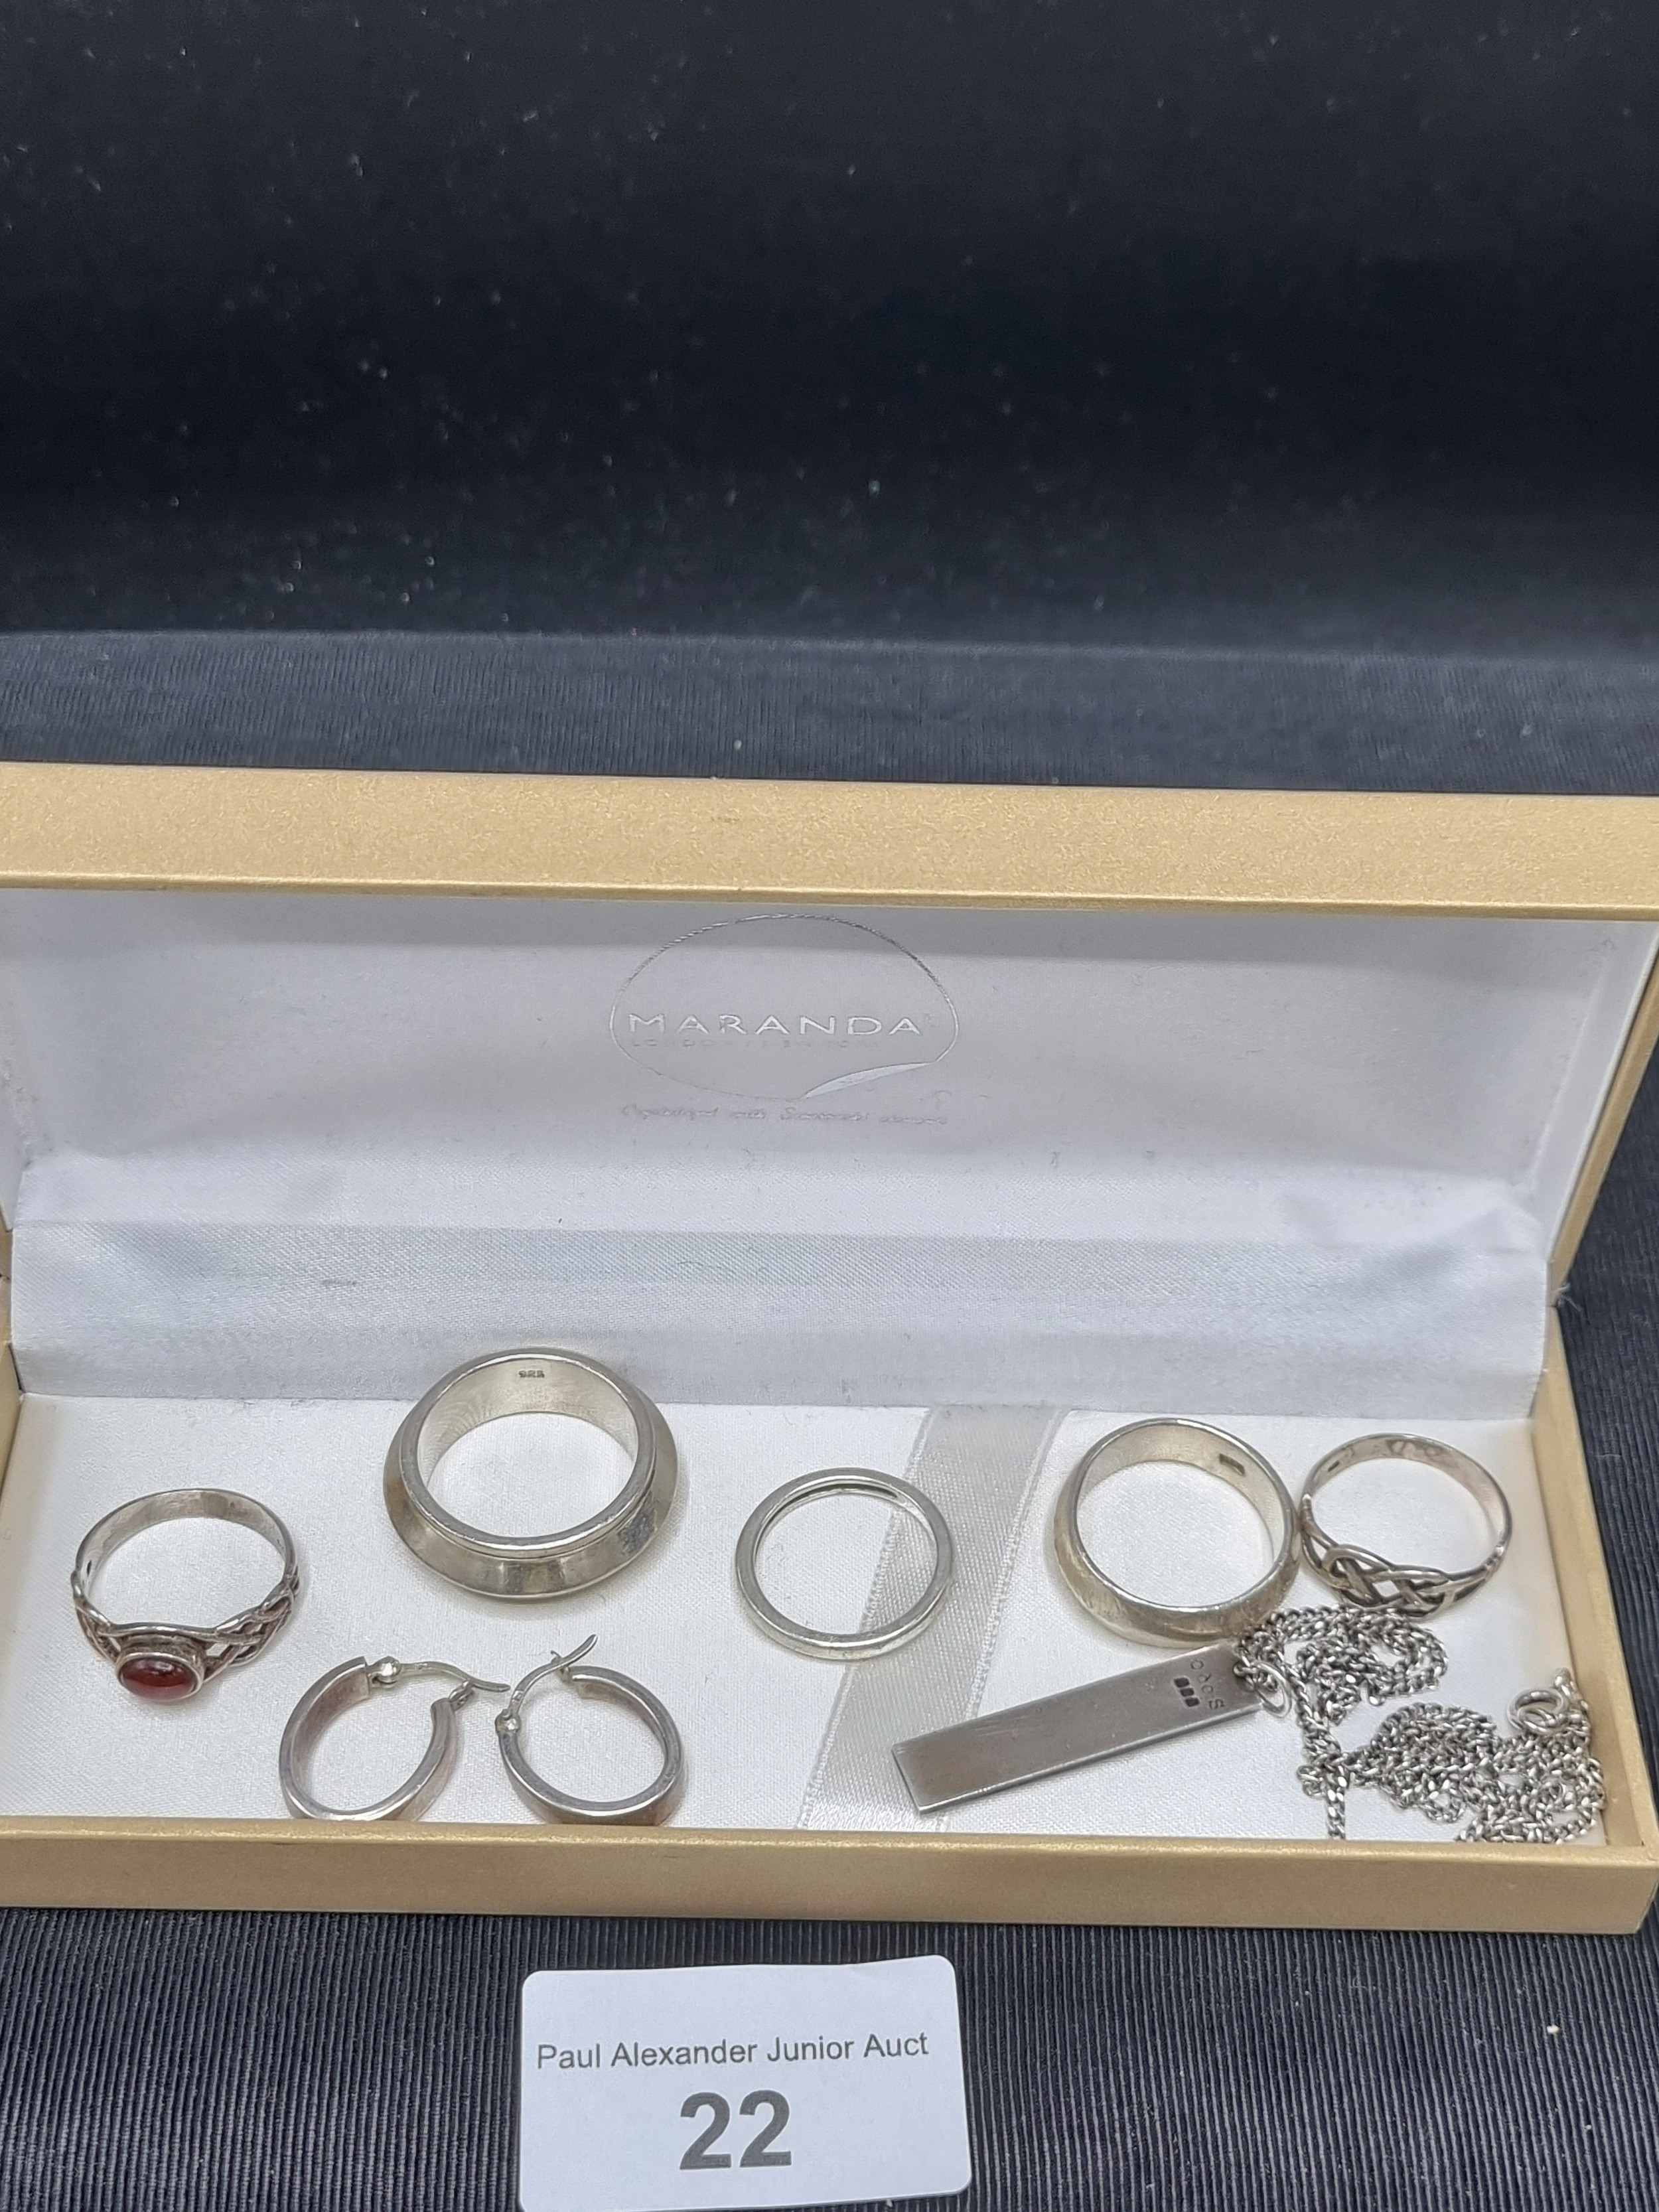 Lot of silver jewellery, men's rings, Celtic rings, earrings and necklace. - Image 3 of 3